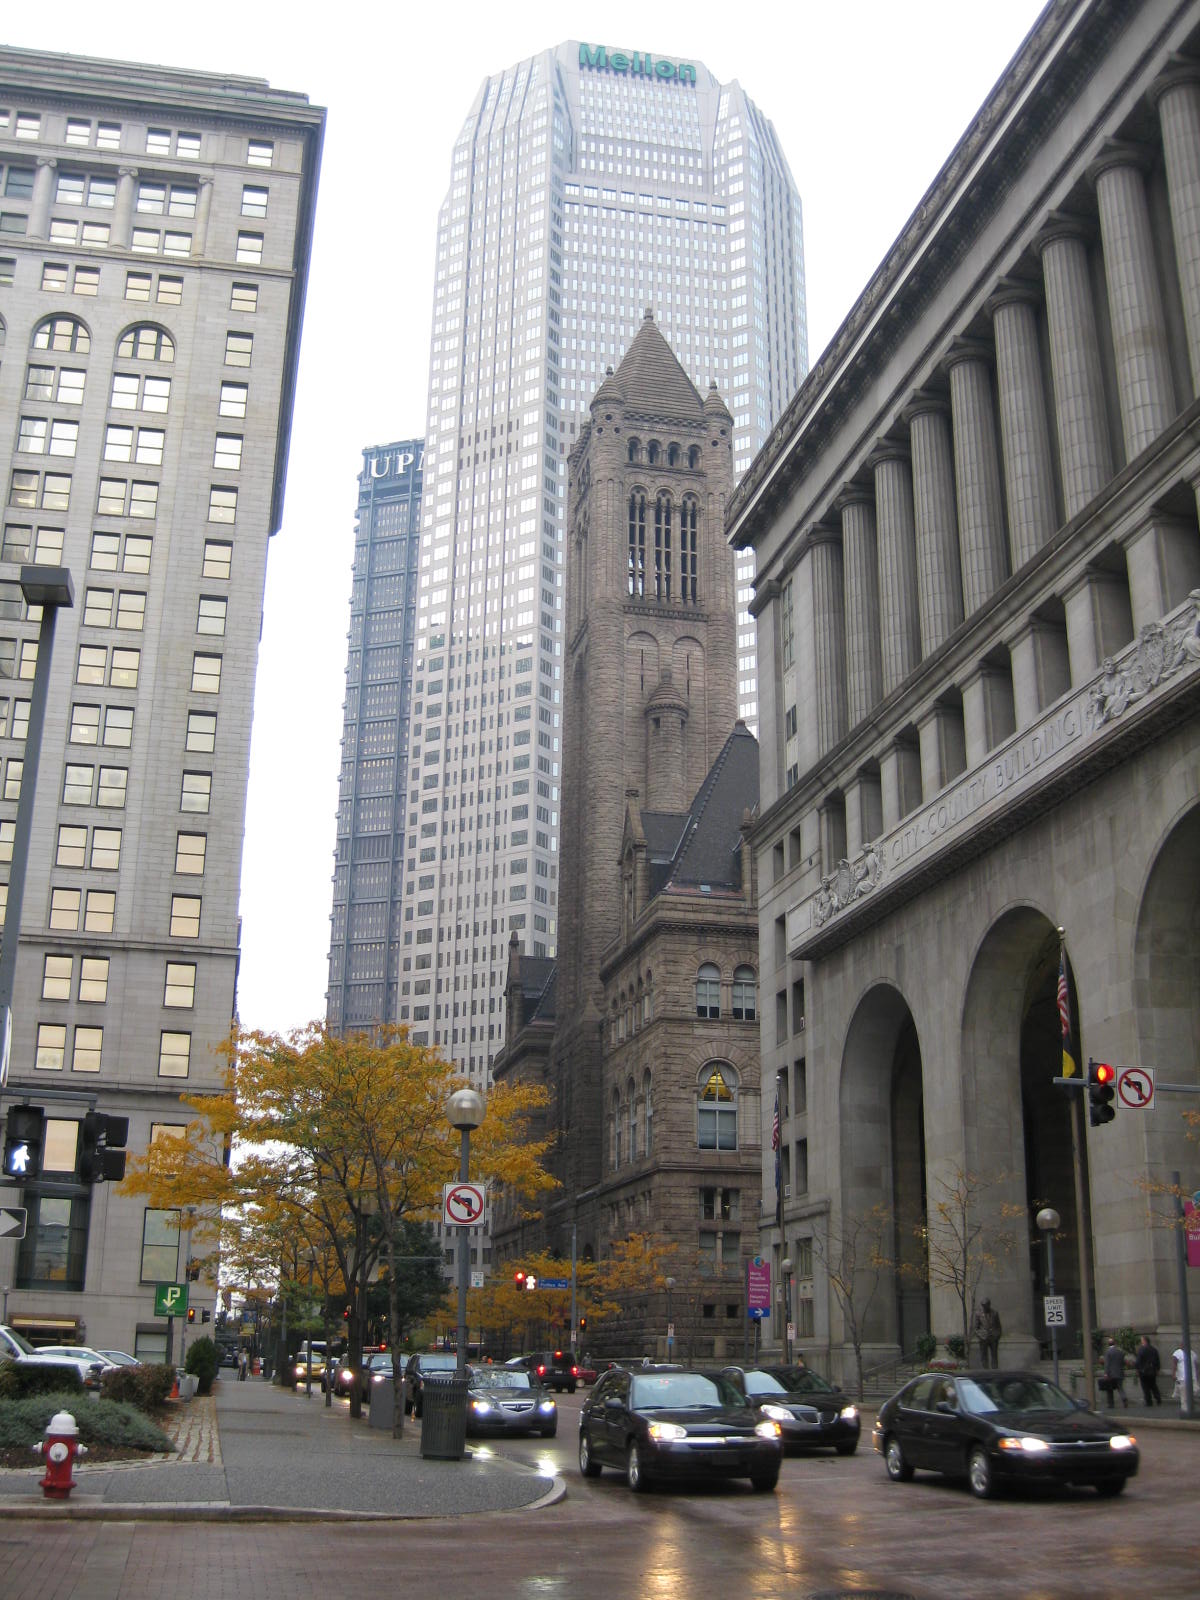 Downtown Pittsburgh Architecture – Preservation in Pink